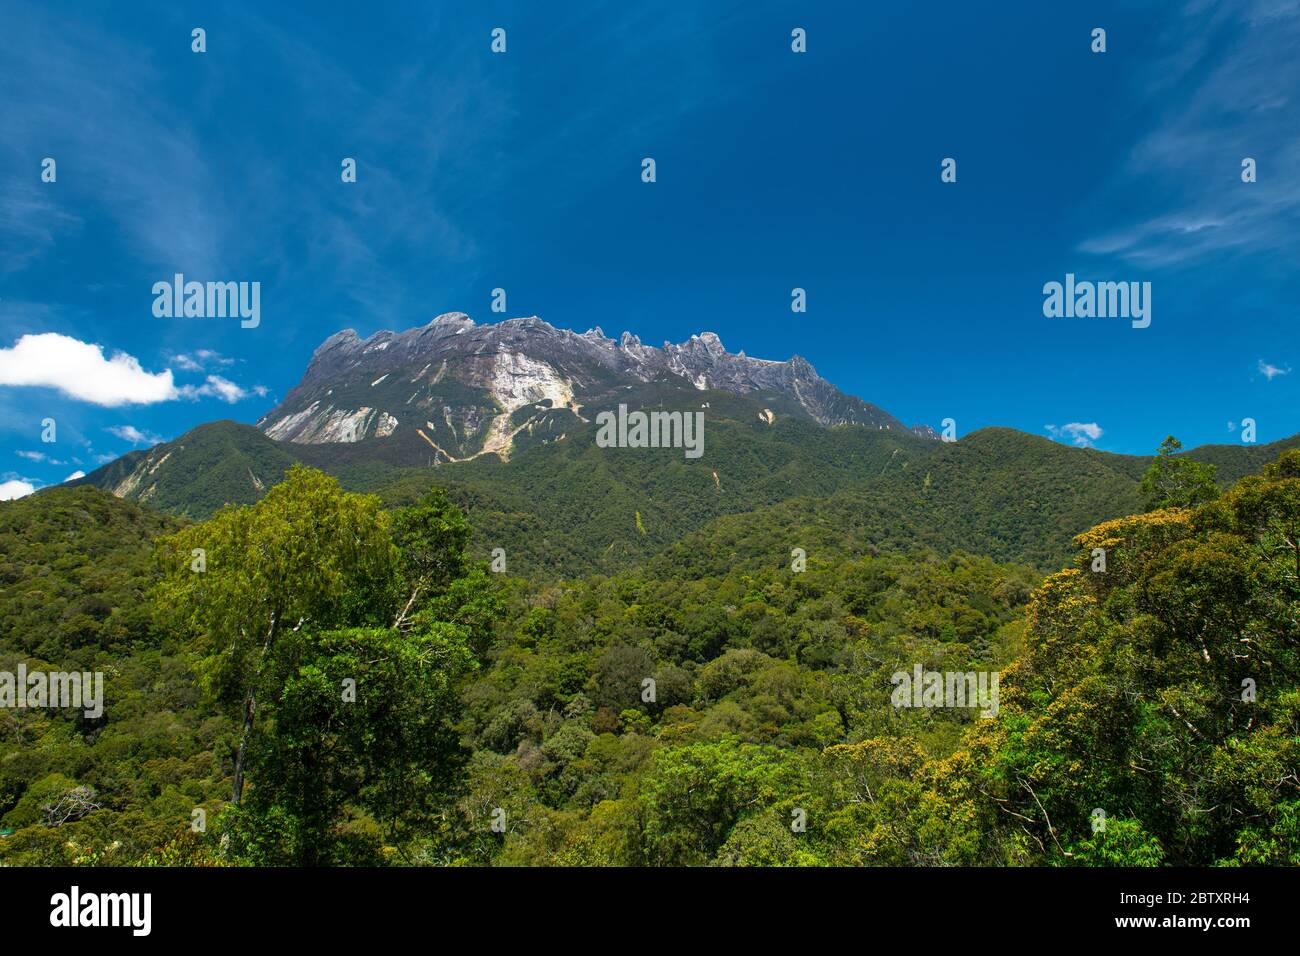 Summit and peaks of Mount Kinabalu in sunlight, with beautiful rainforest in the foreground, and sky above. Mount Kinabalu, Sabah, Borneo, Malaysia Stock Photo